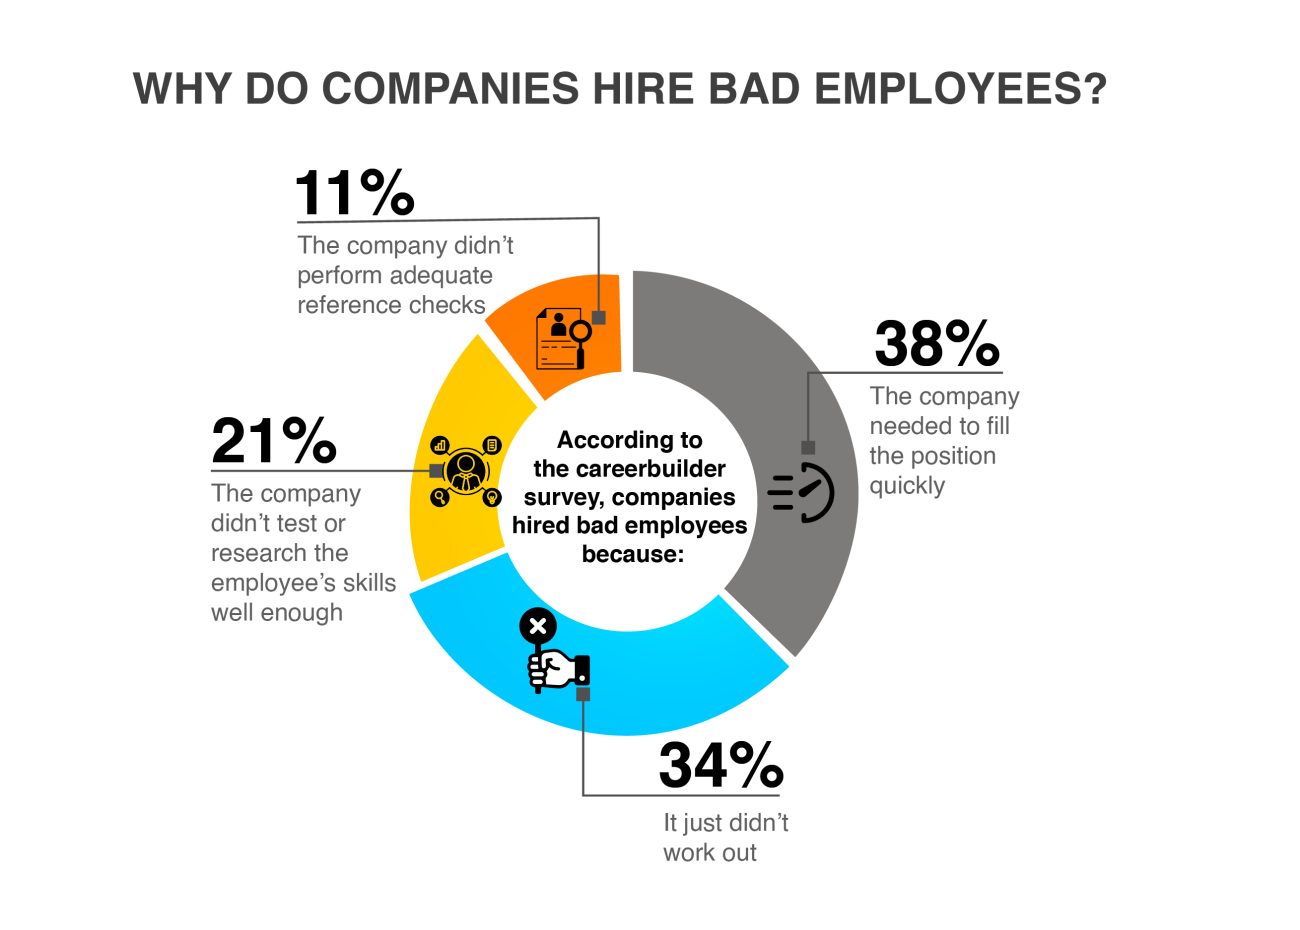 Why do companies hire bad employees chart?